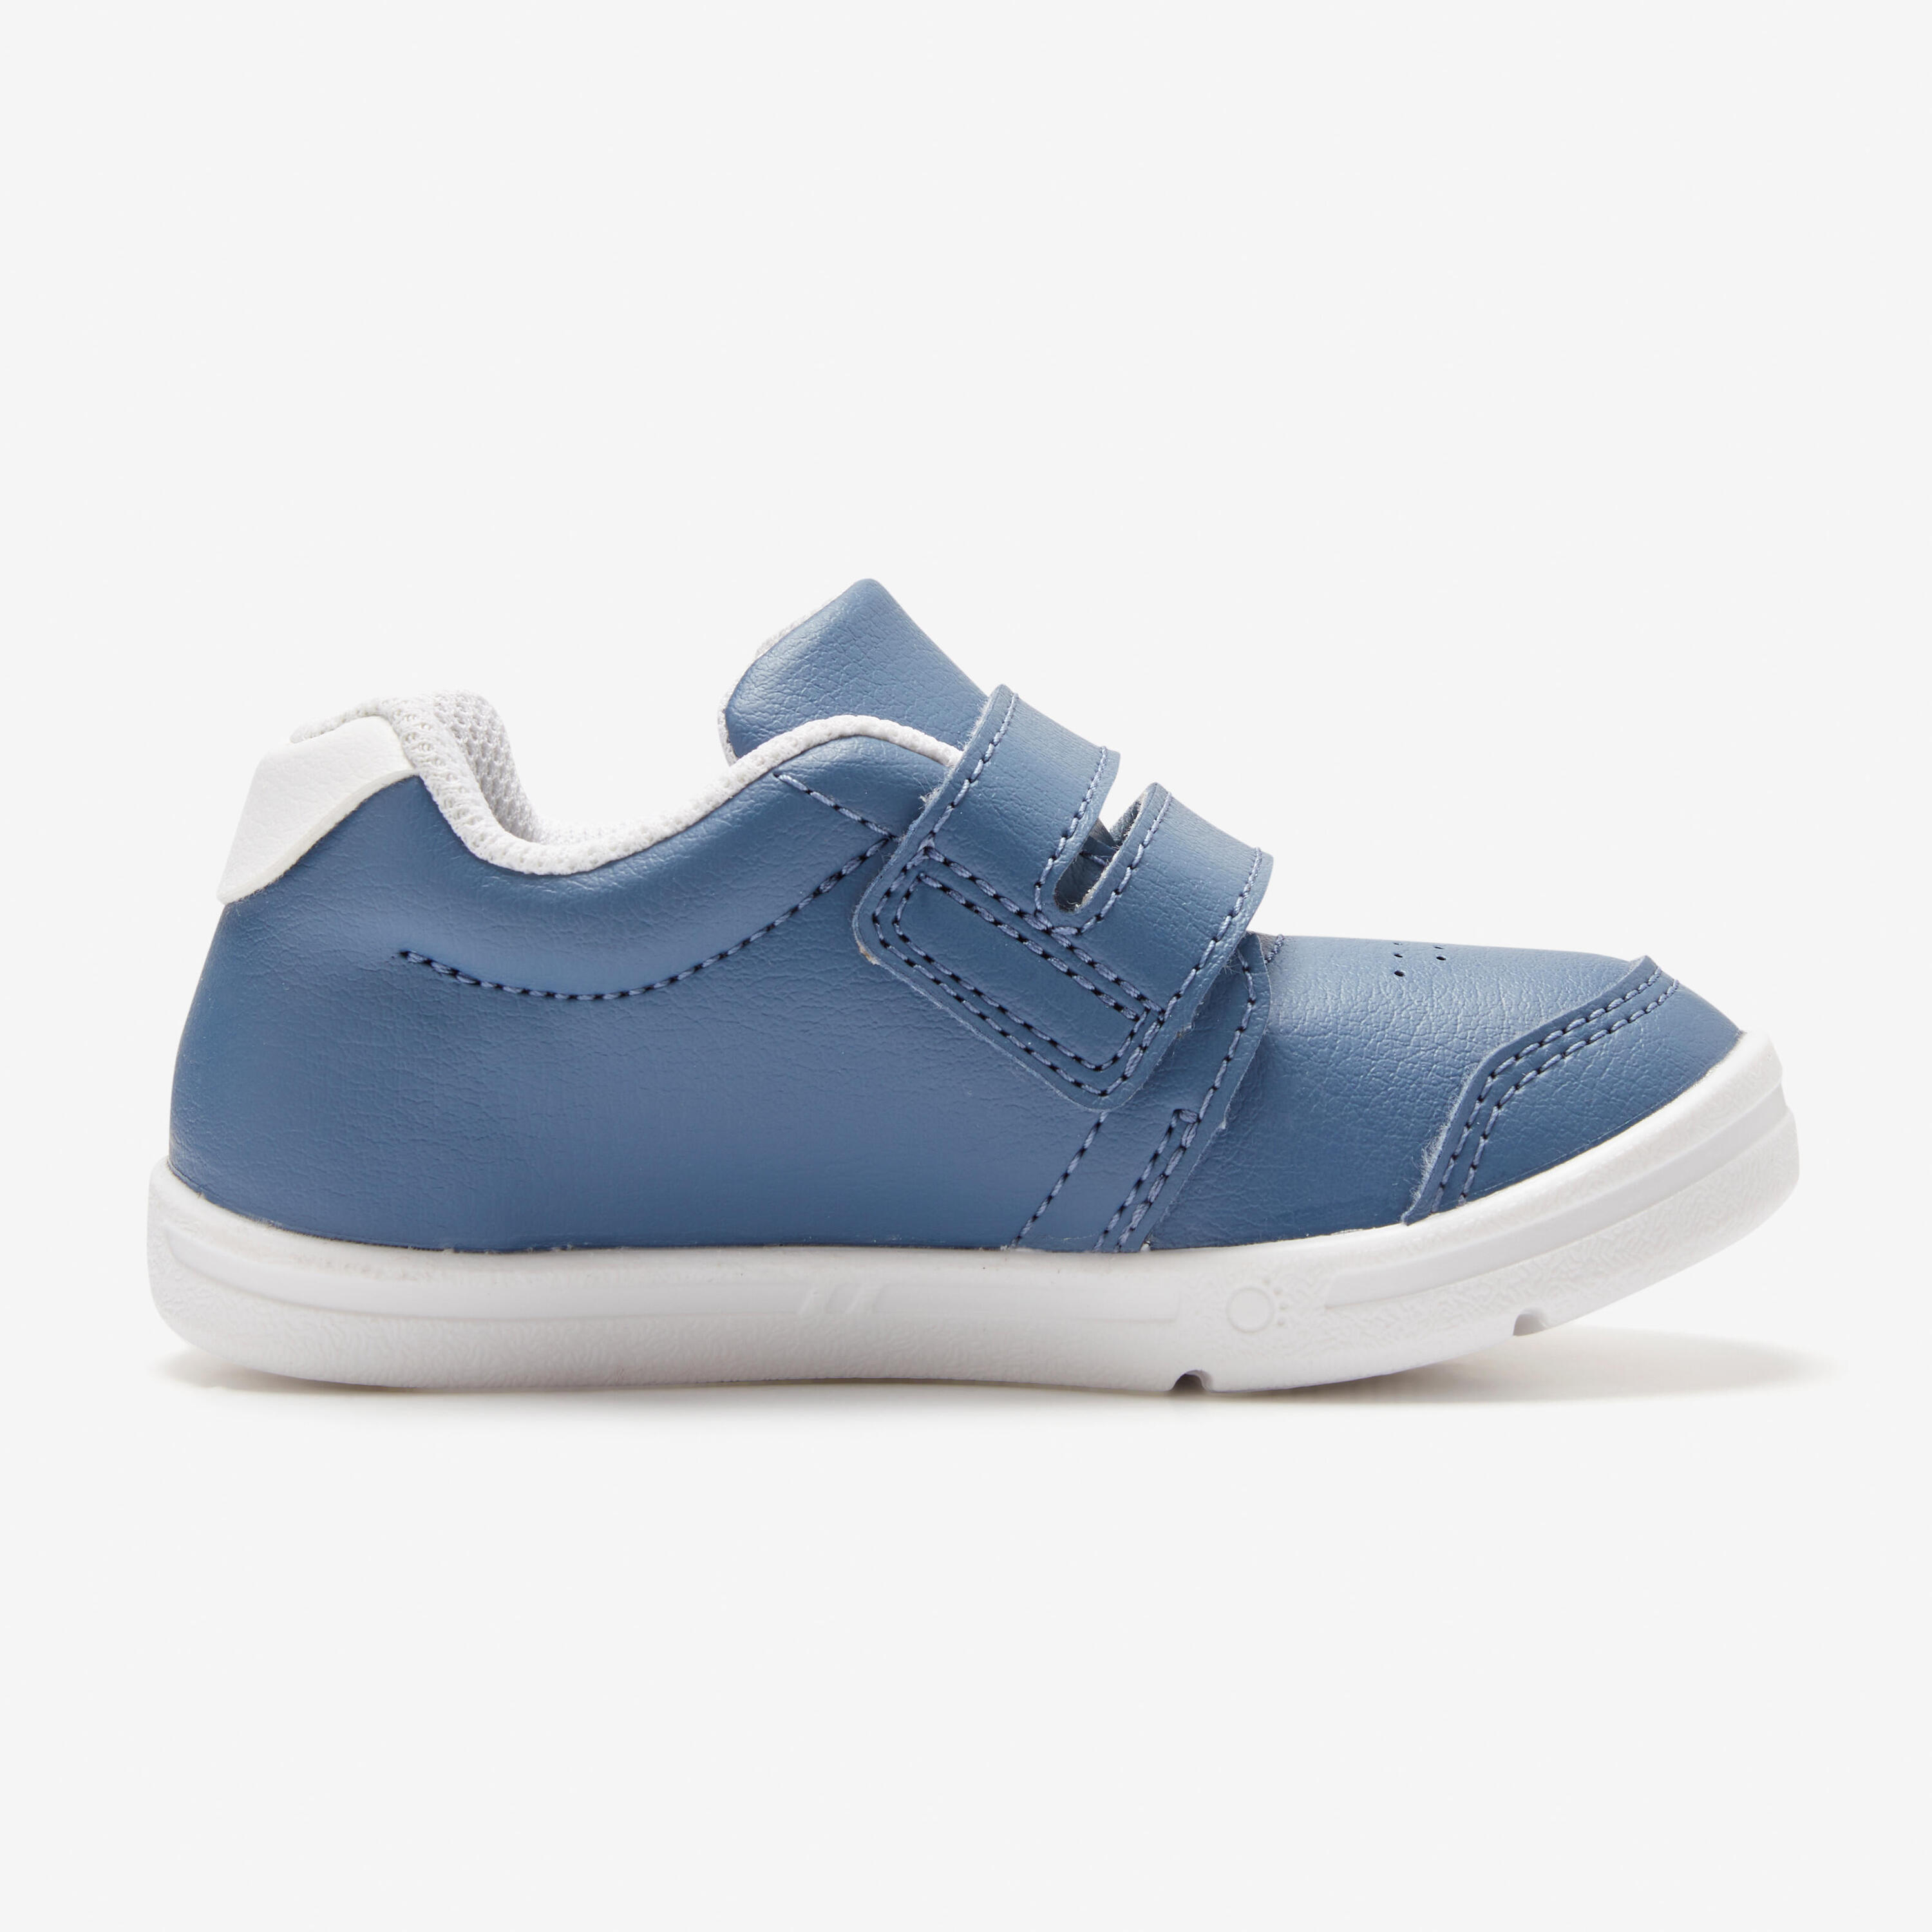 Kids' Rip-Tab First Step Shoes Size 3.5C to 6.5C I Learn 2/7